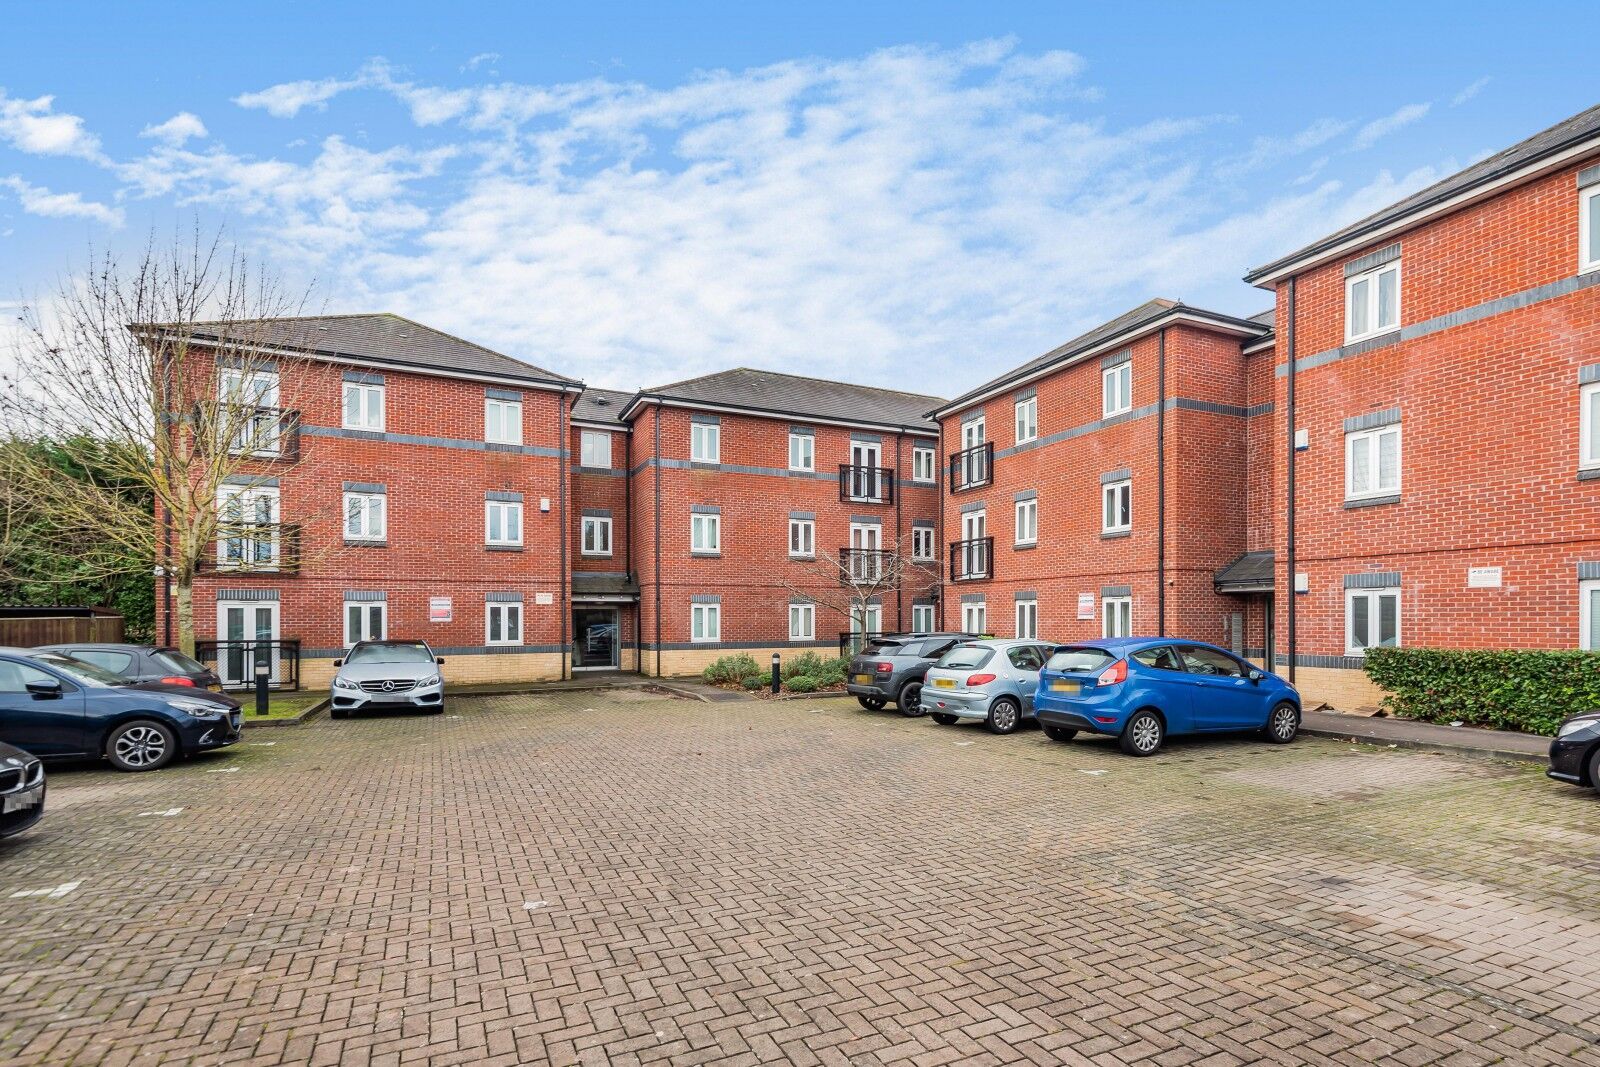 2 bedroom  flat for sale Brasenose Driftway, Cowley, OX4, main image